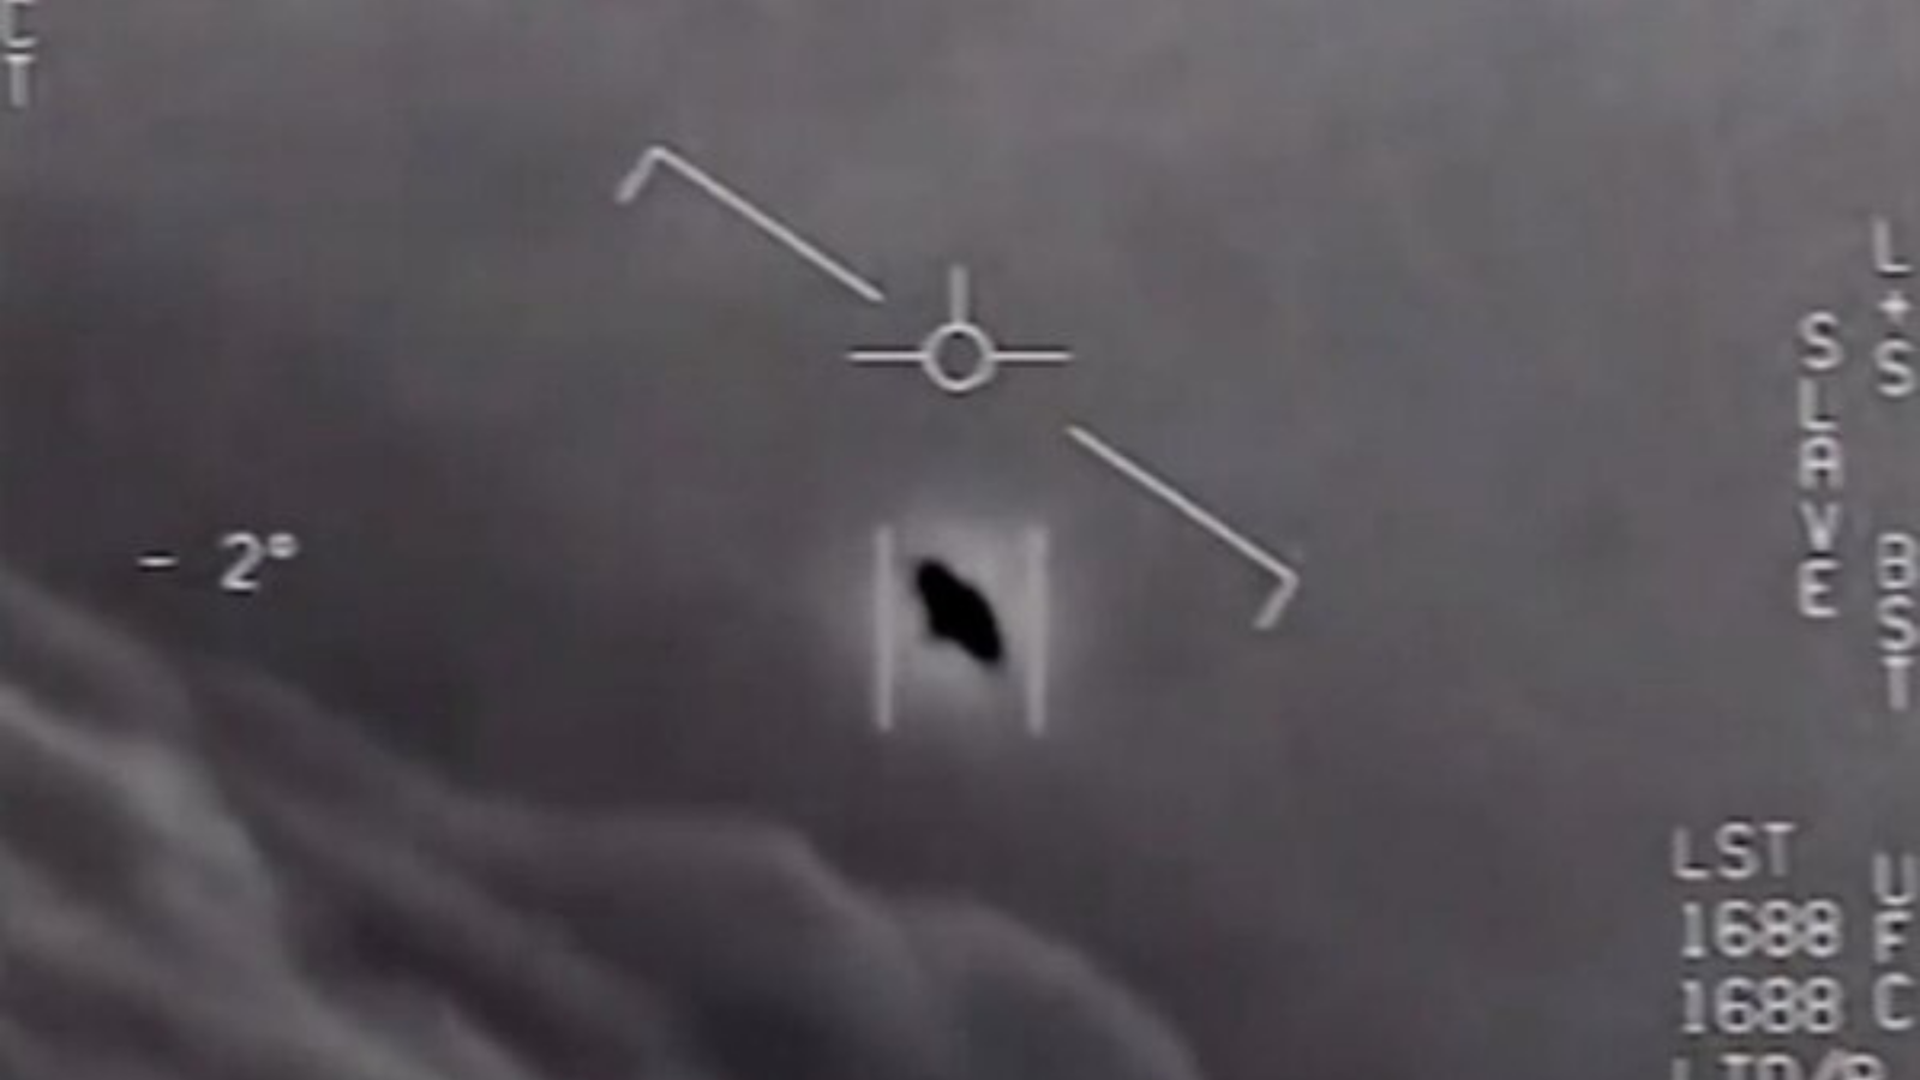 A whistleblower from the US military told Congress the US government is hiding downed UFOs.